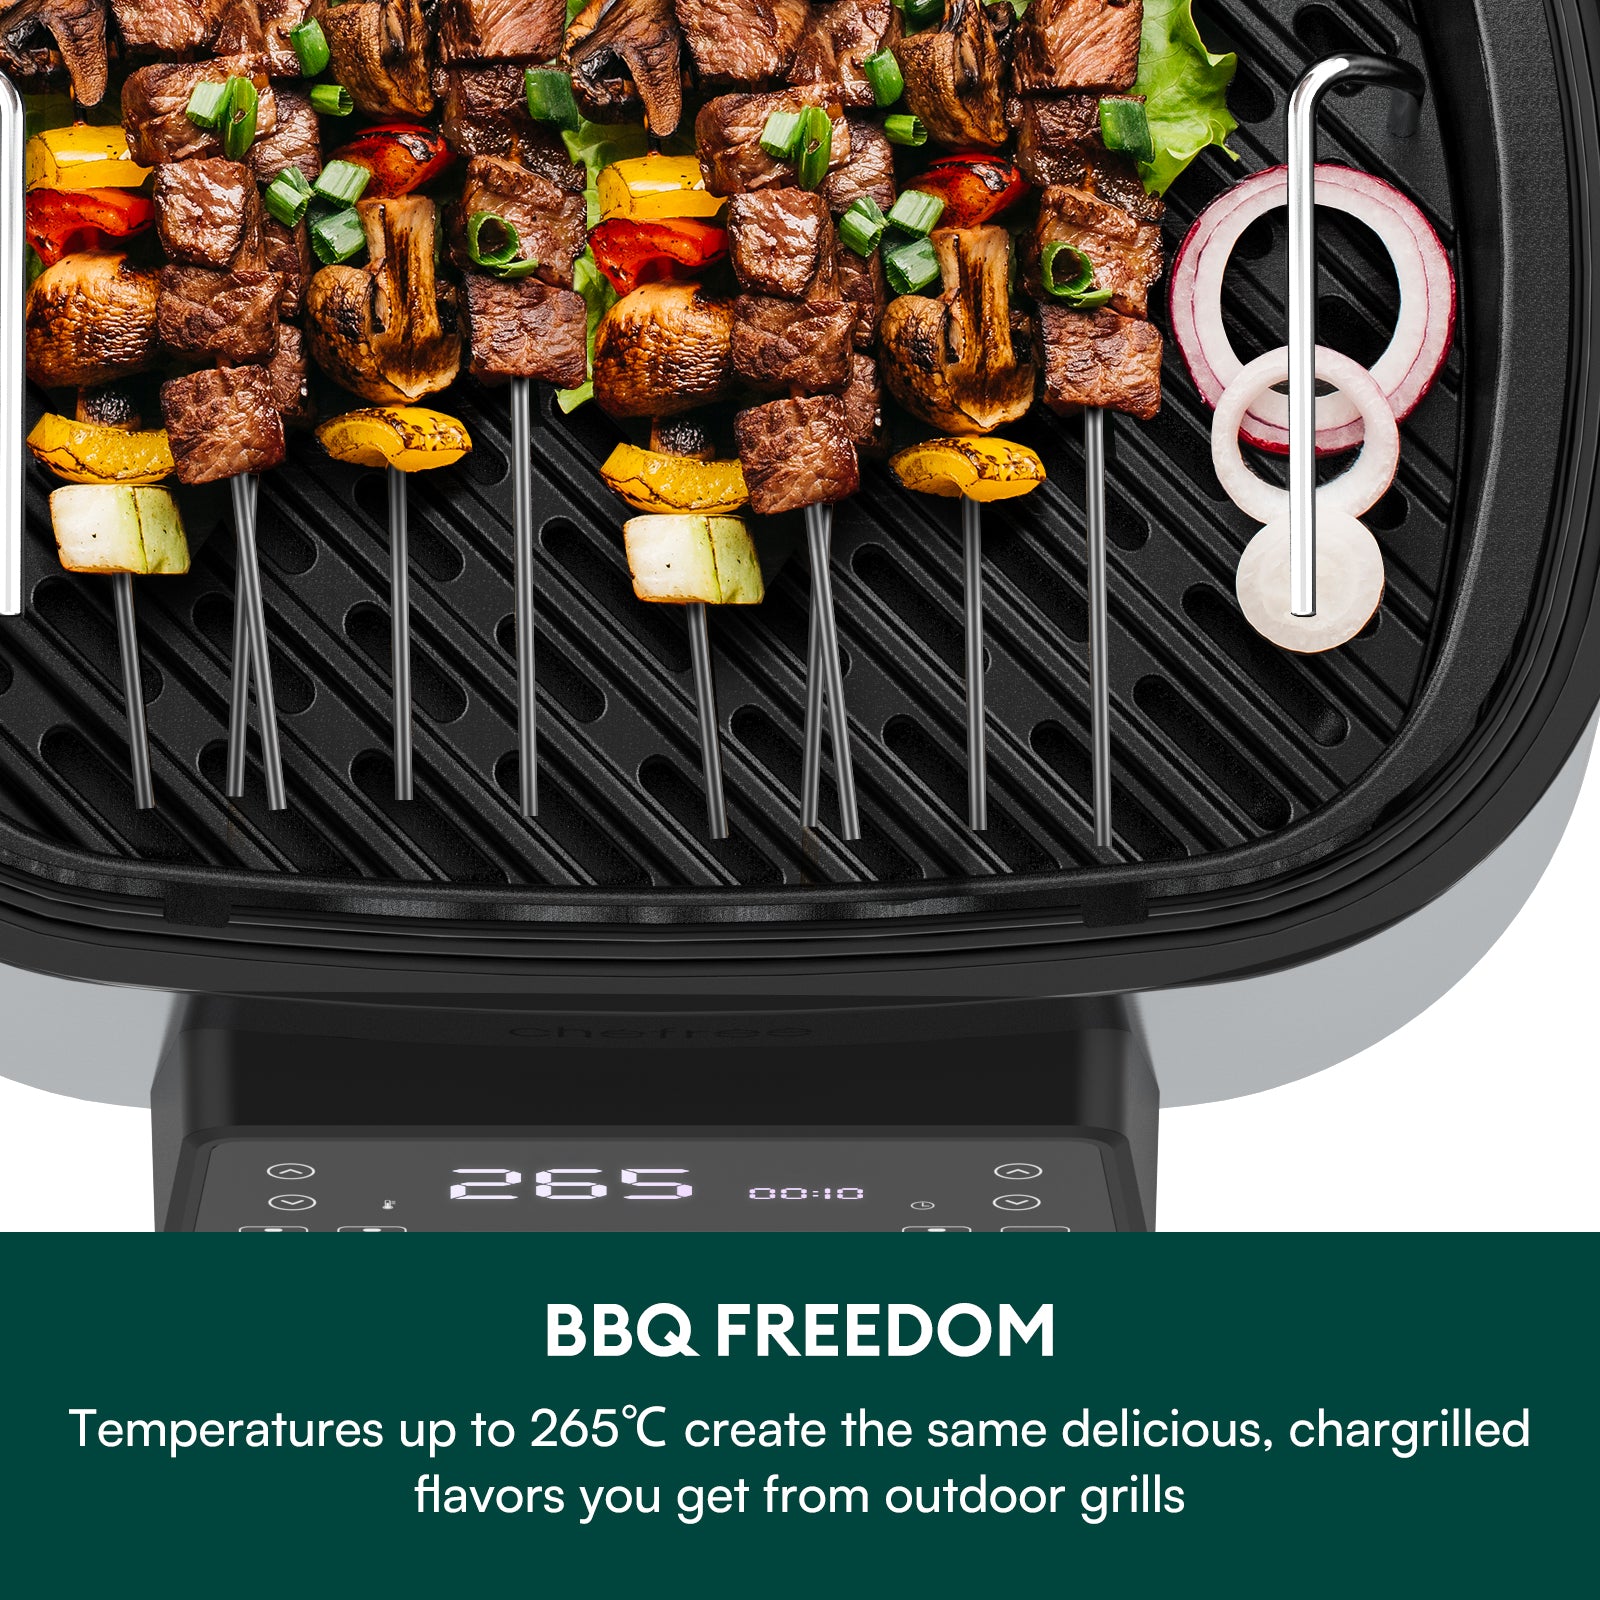 Chefree Air Fryer Grill AFG01